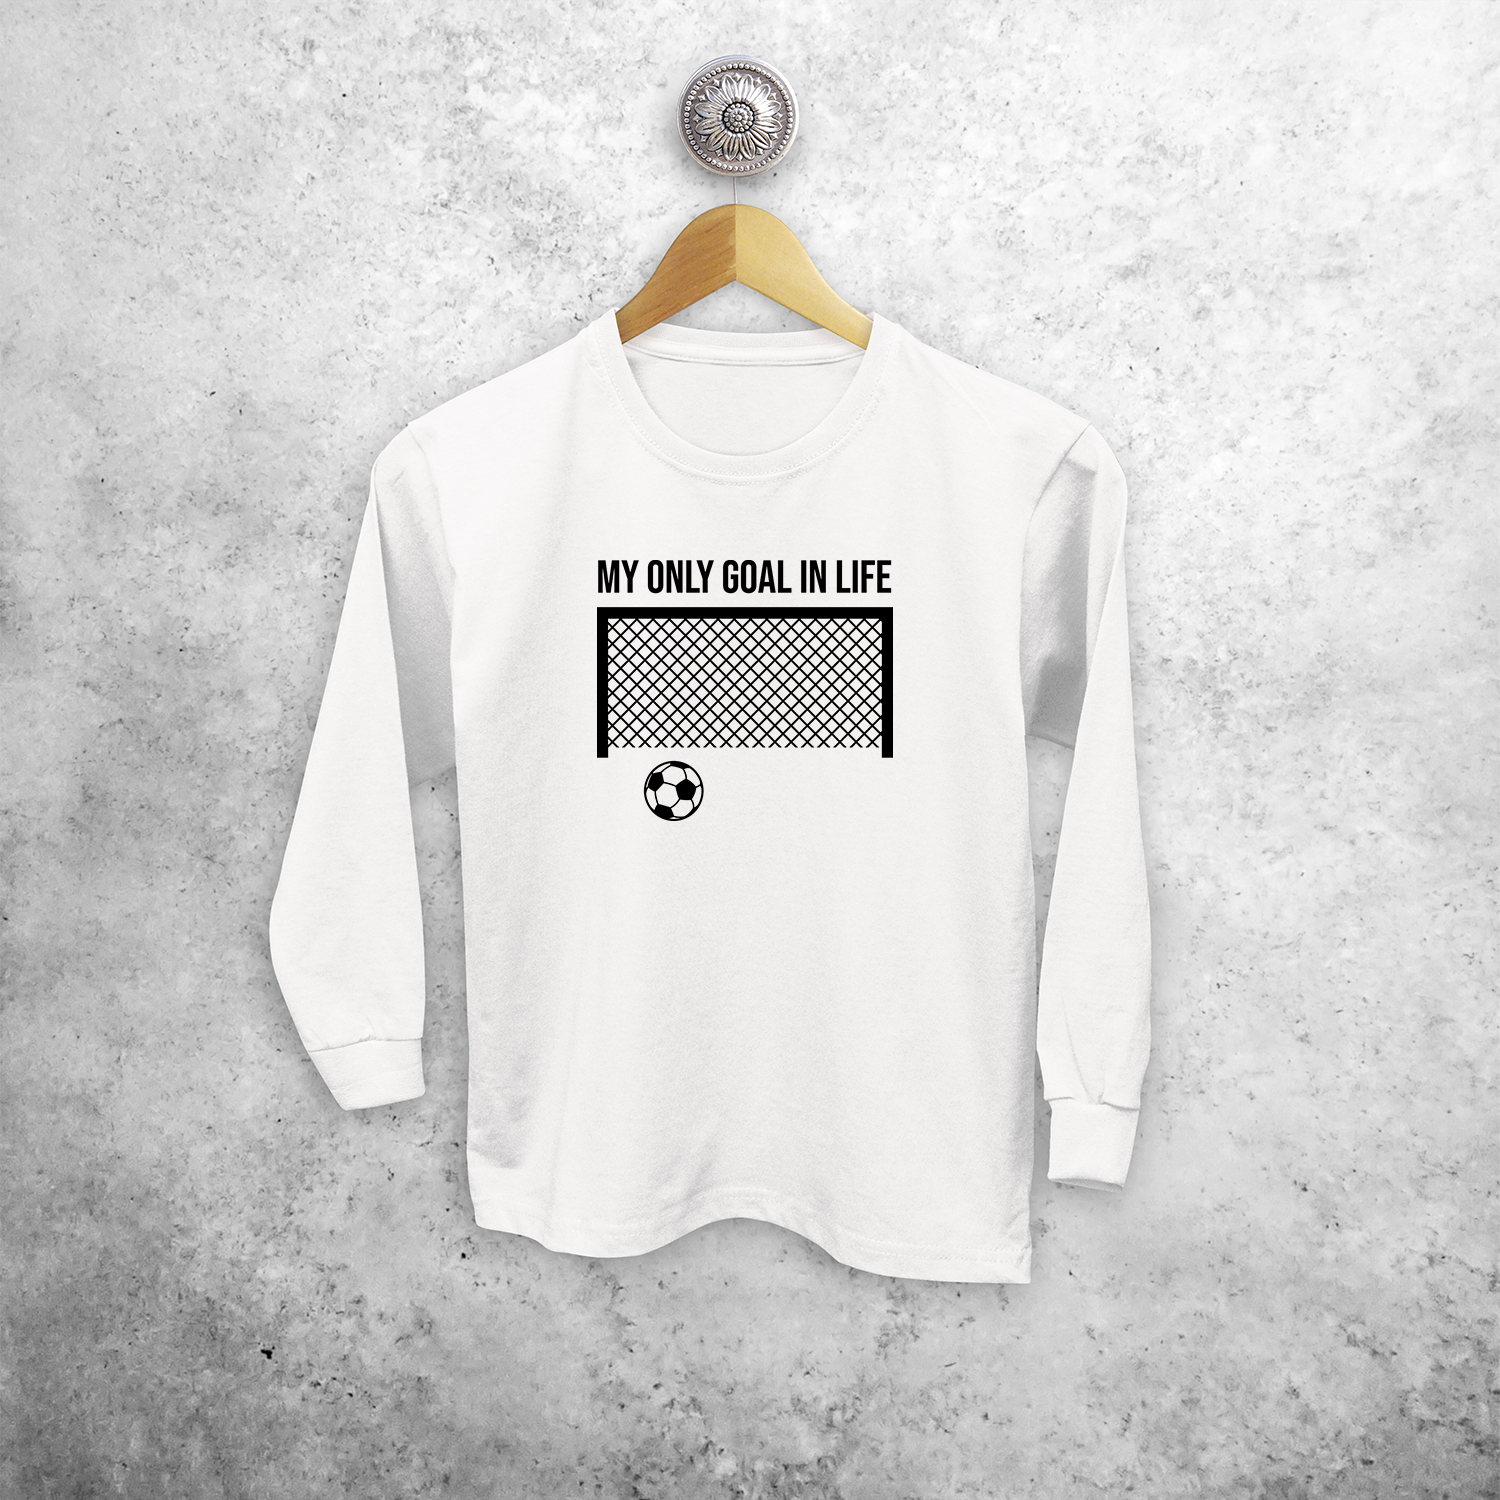 'My only goal in life' kids longsleeve shirt